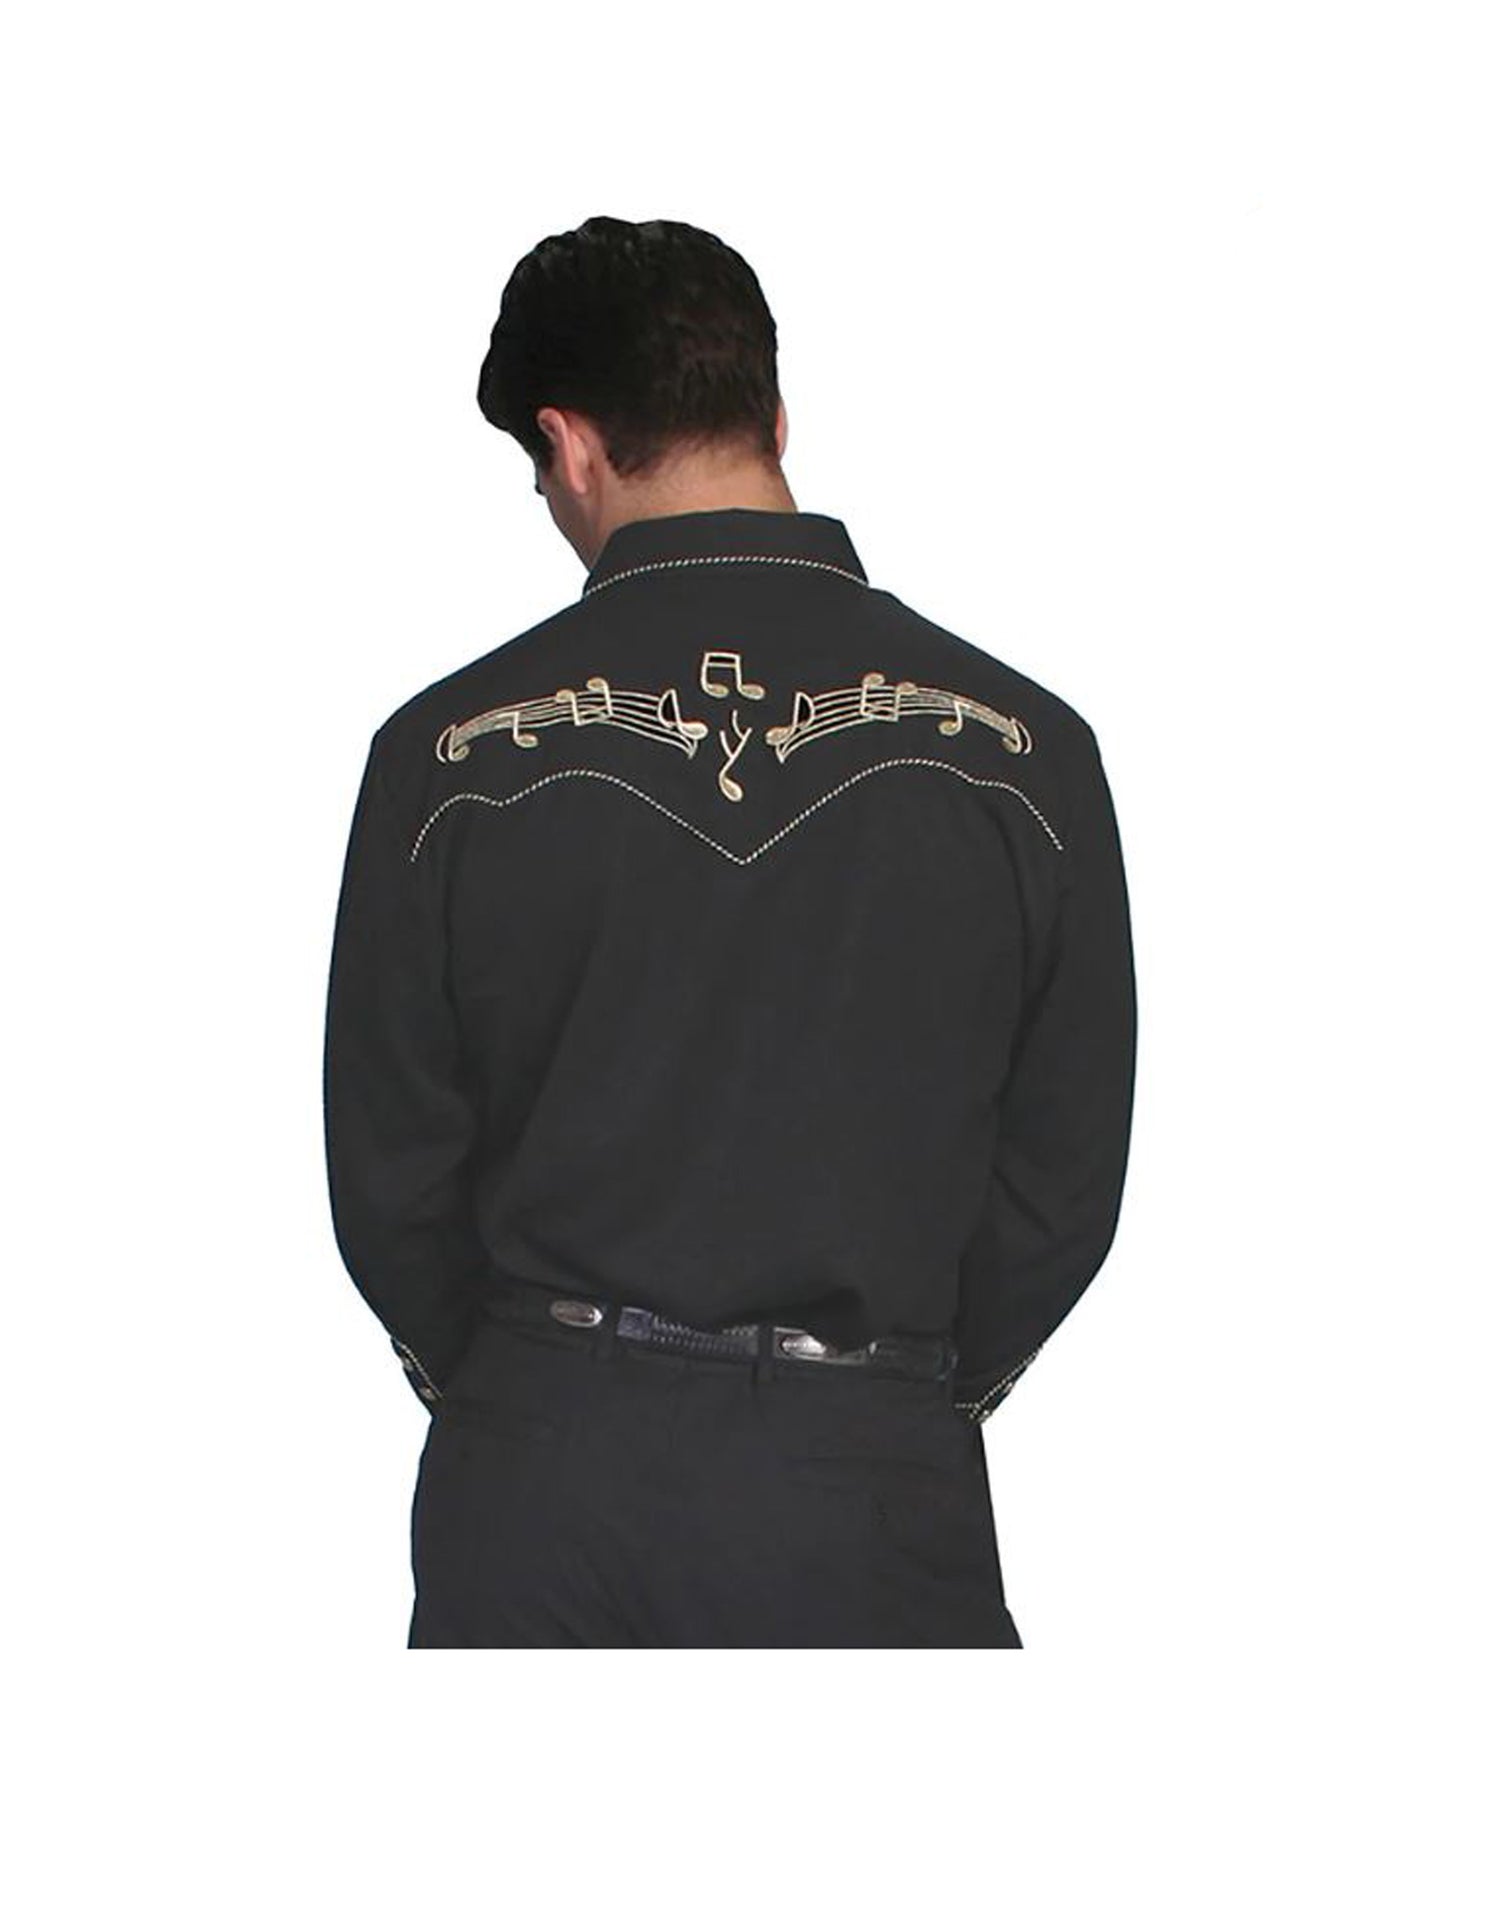 Men's Musical Embroidery Western Snap Shirt